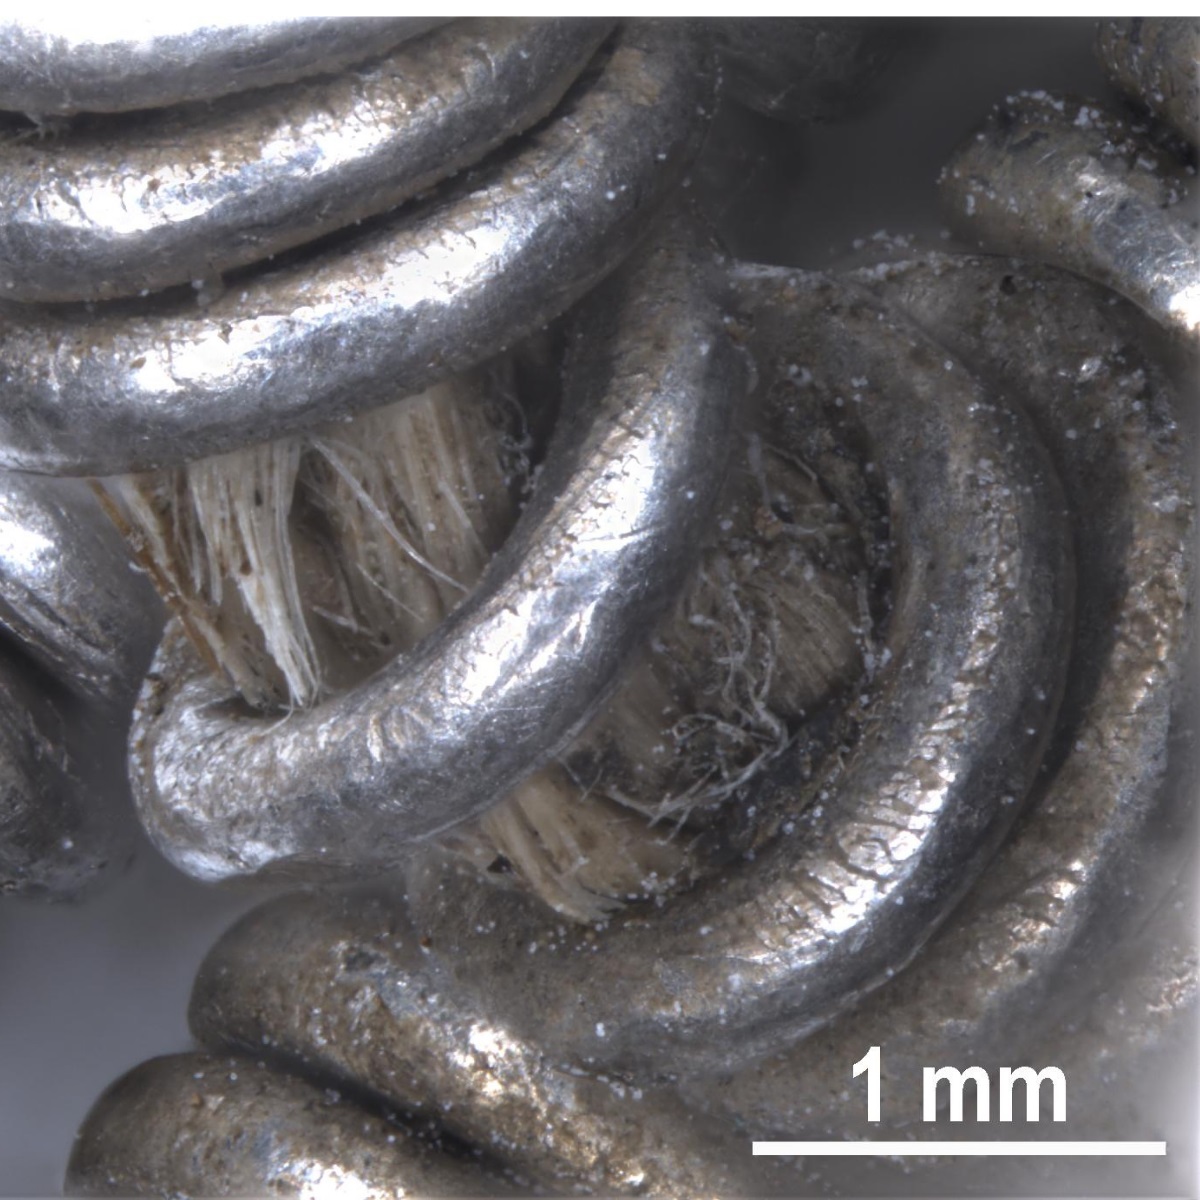 Microscopic closeup of silver links coming apart, revealing a light yellow hair-like material underneath,